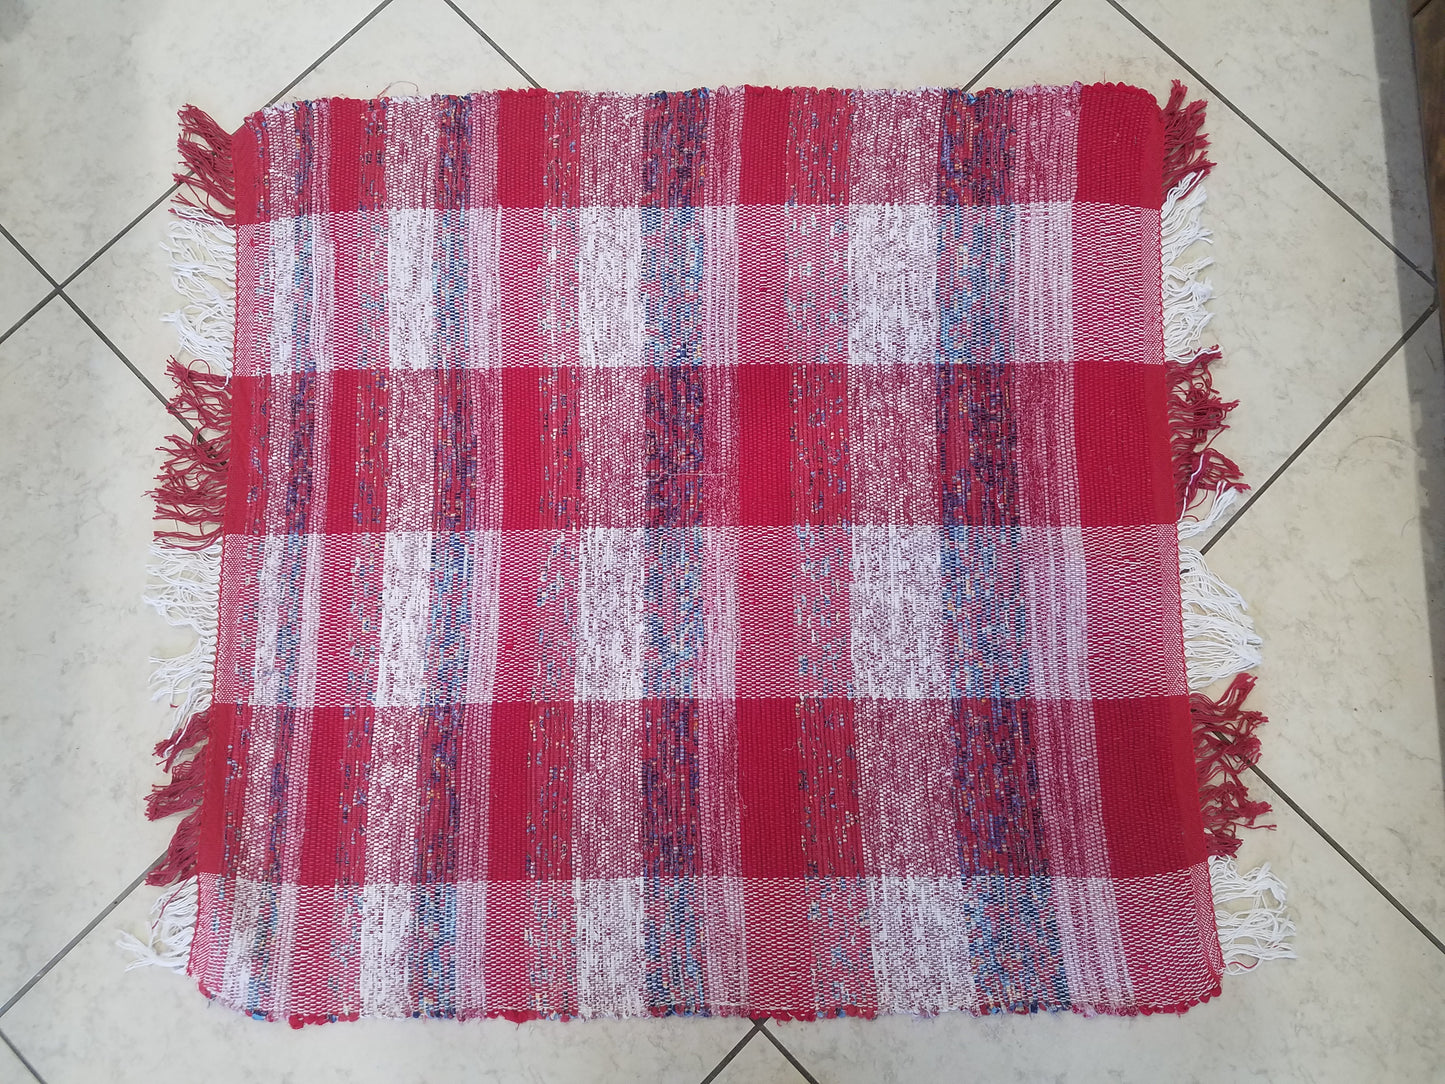 Woven Red and White Striped Rag Rug